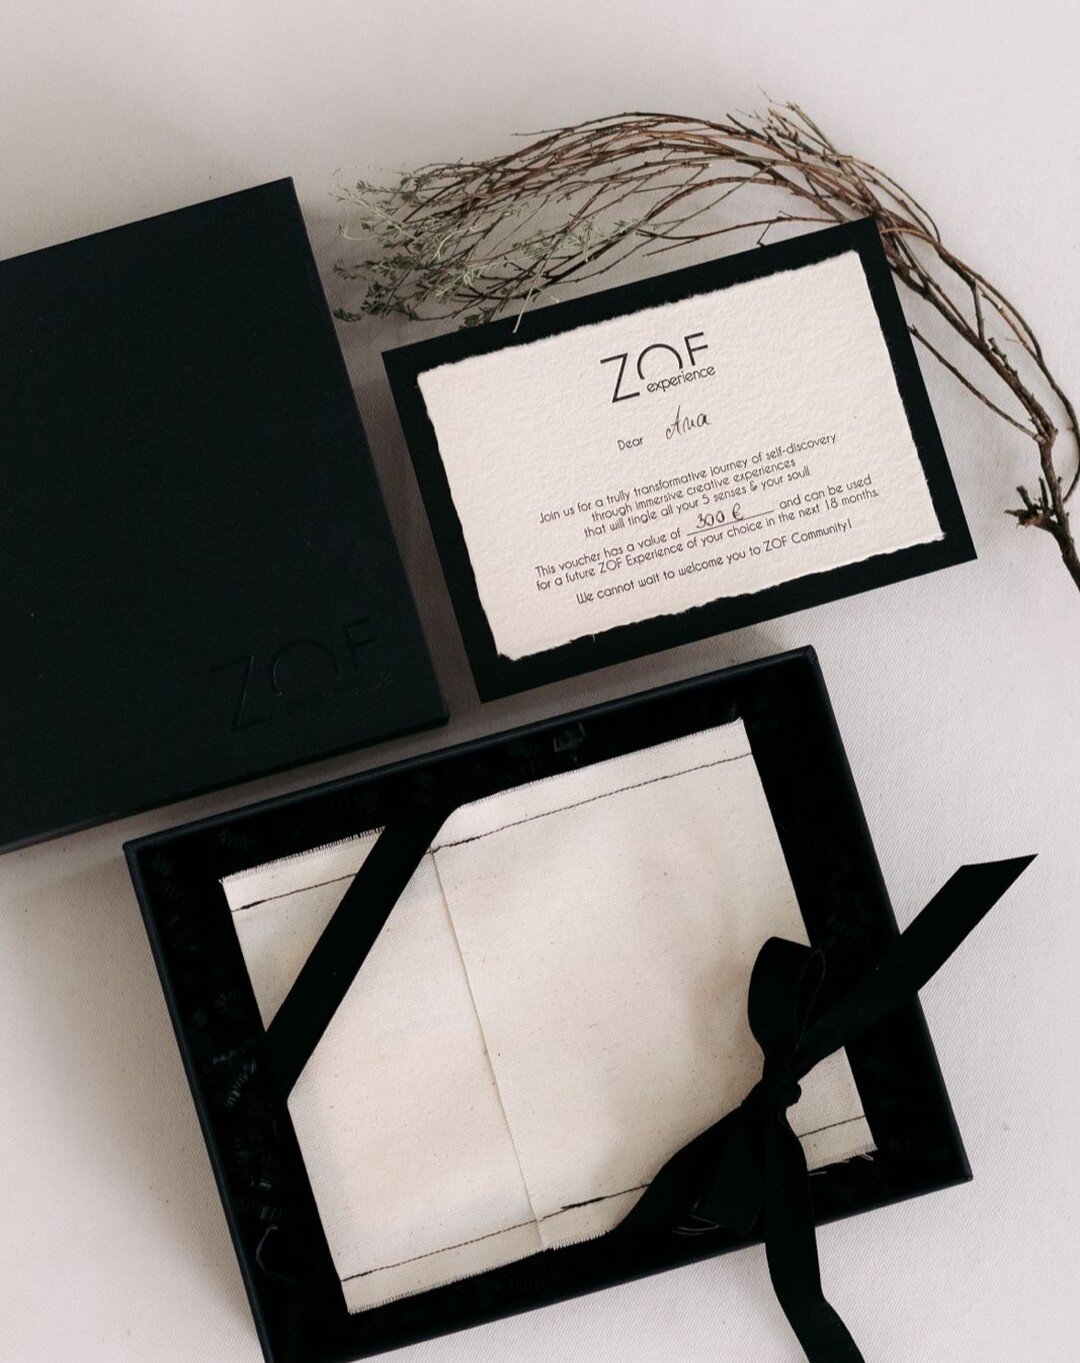 Designed for those who crave depth and meaning in their gifts, the ZOF EXPERIENCE VOUCHER is perfect for your loved ones who deserve more than just a present. 🤍
___
It's for the seeker of beauty, the lover of life's depths, and the adventurer yearni